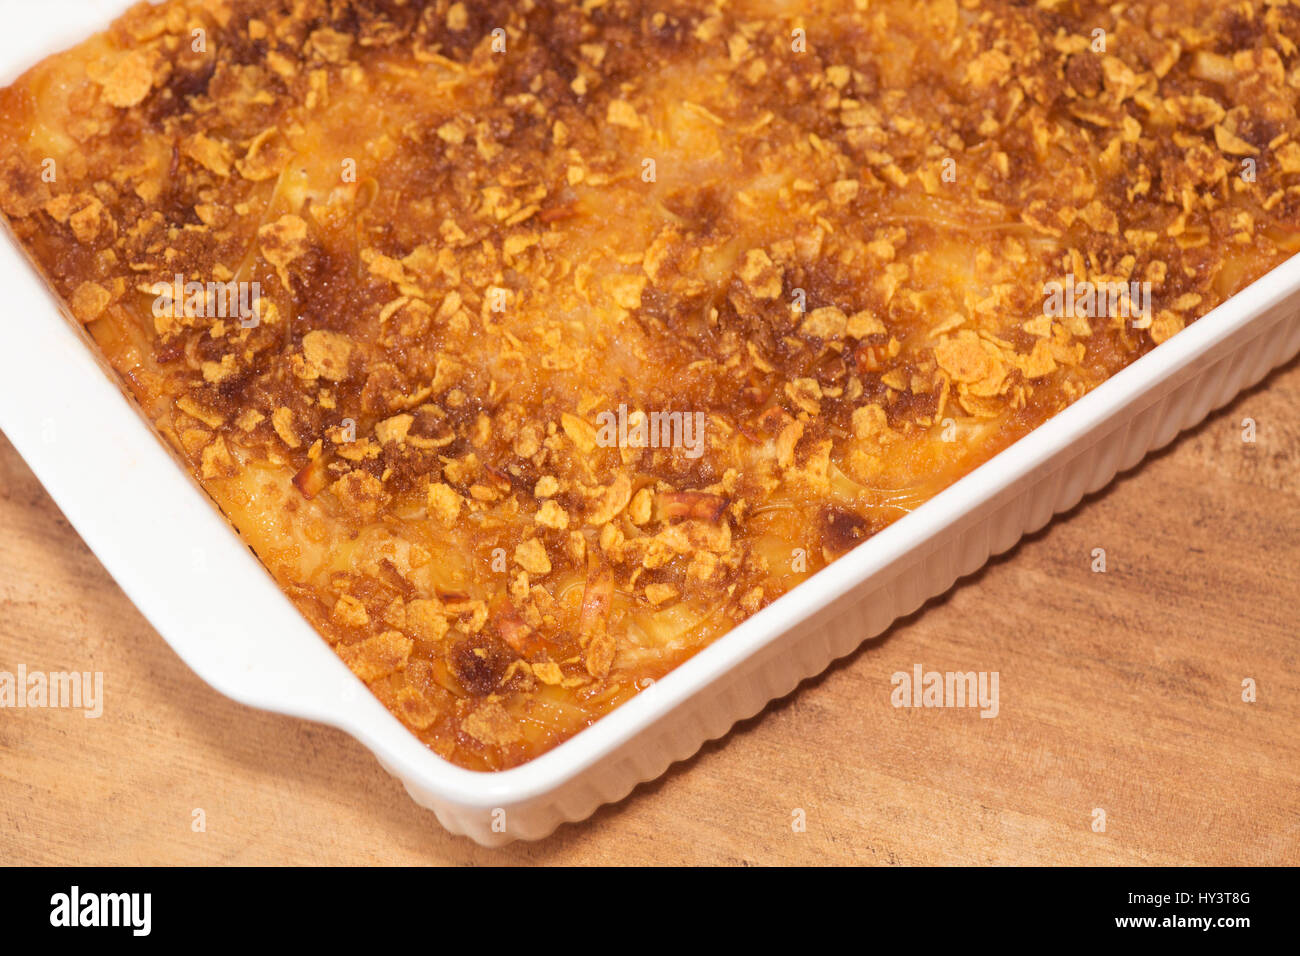 Kugel, a homemade baked sweet casserole made from egg noodles, with cereal and brown sugar sprinkled on top Stock Photo